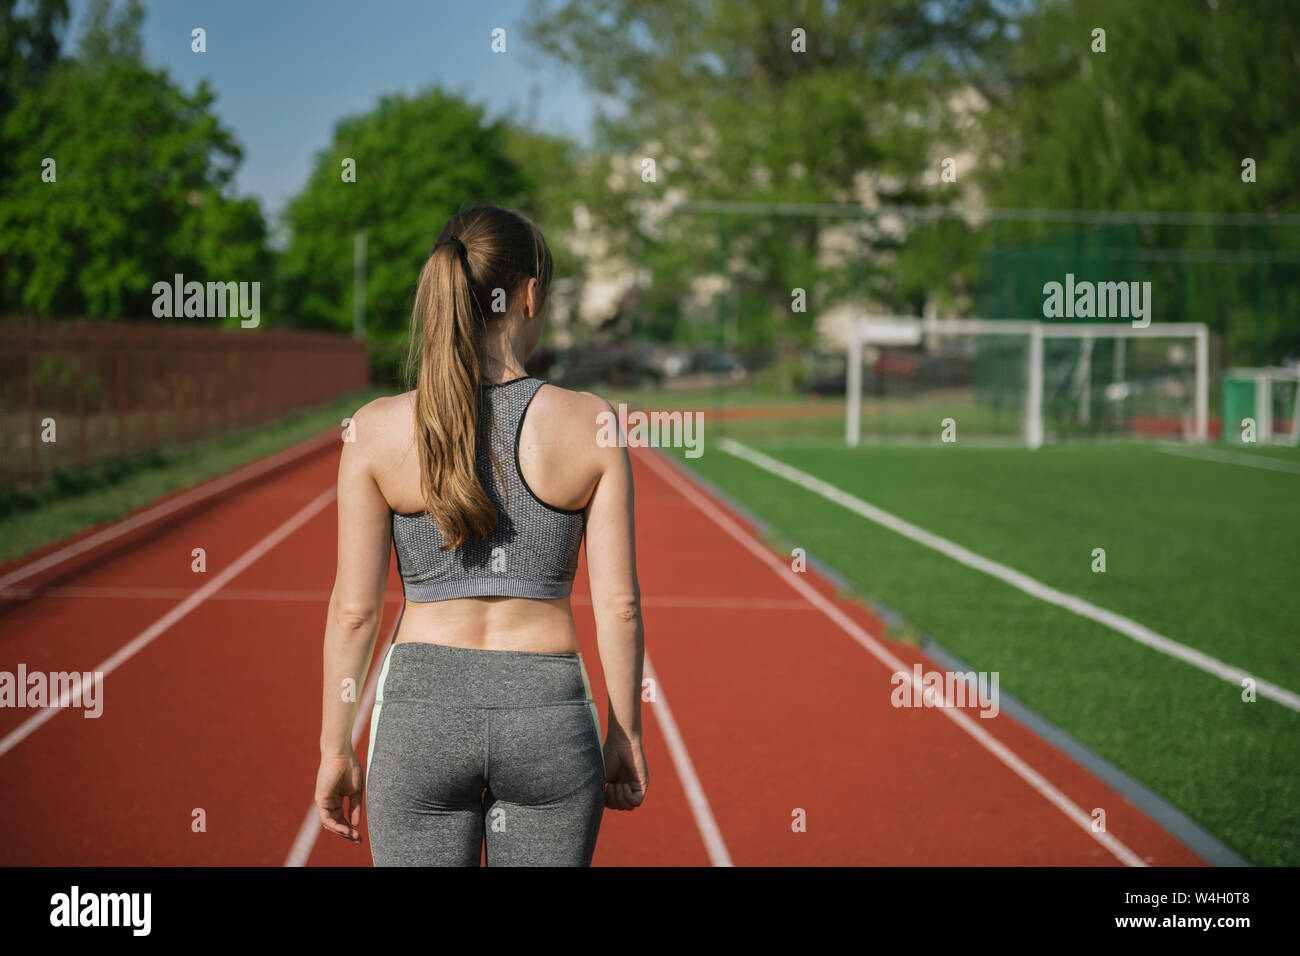 Rear view of sportswoman standing on racetrack in stadium Stock Photo